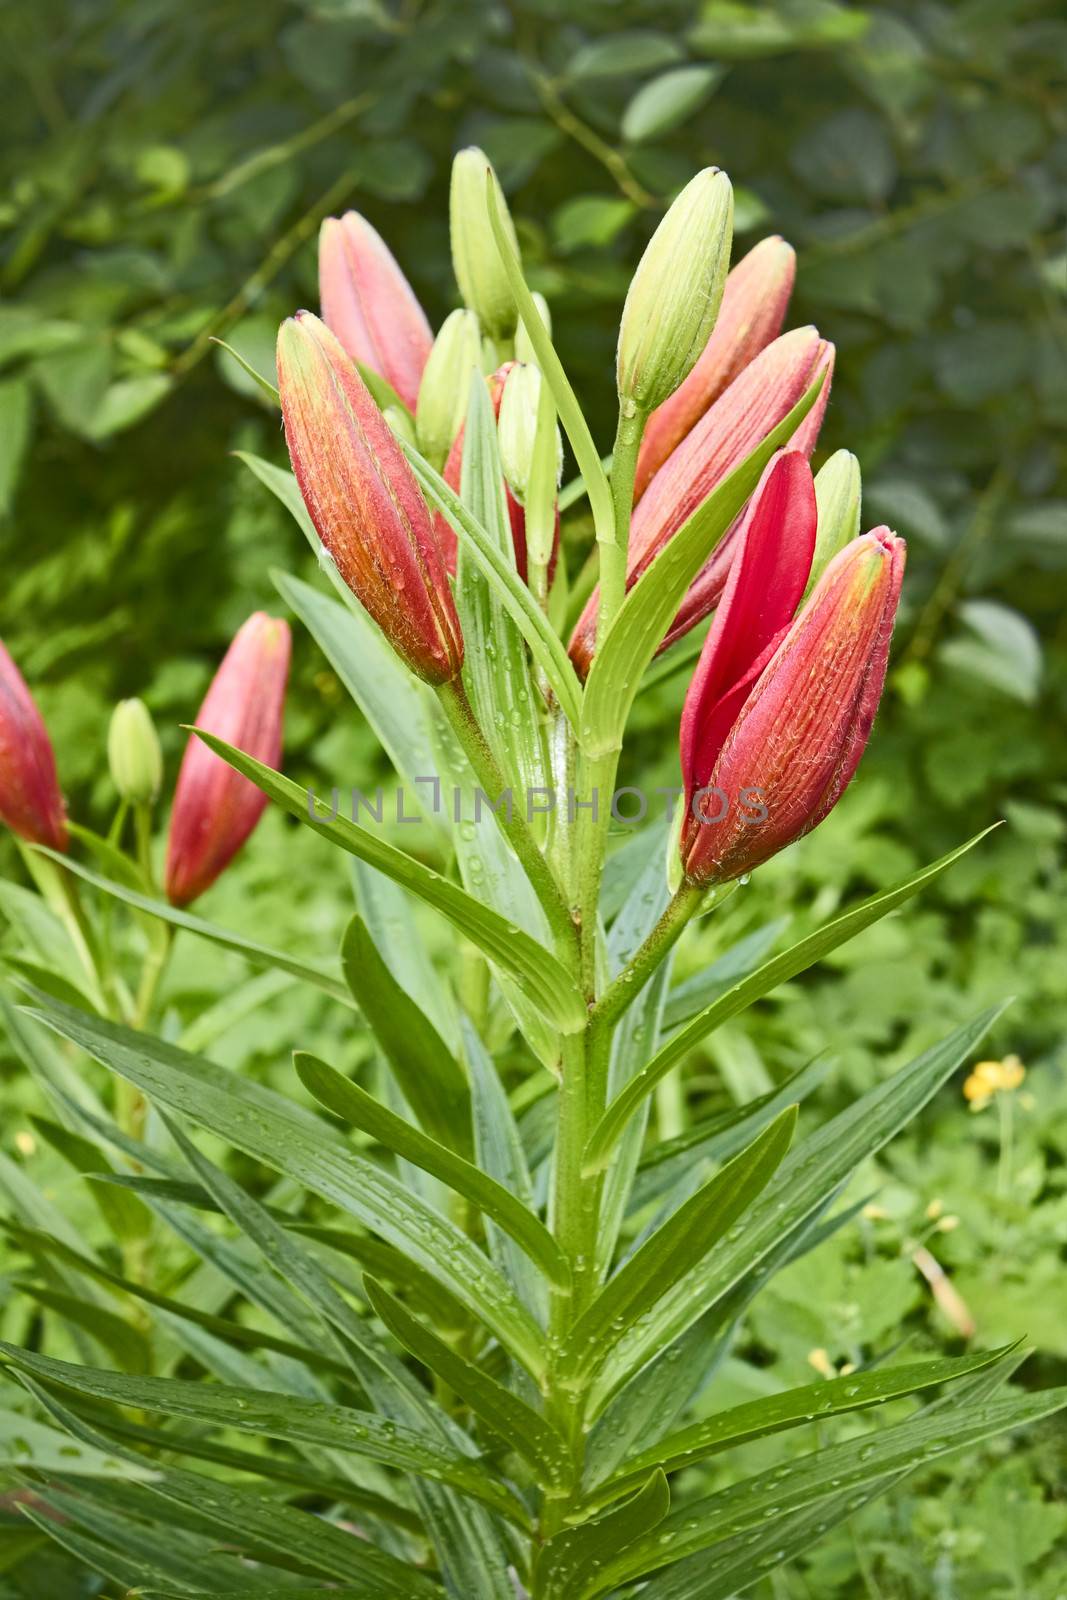 Buds of lilies opened in the flowerbed in June in good sunny weather. Close-up